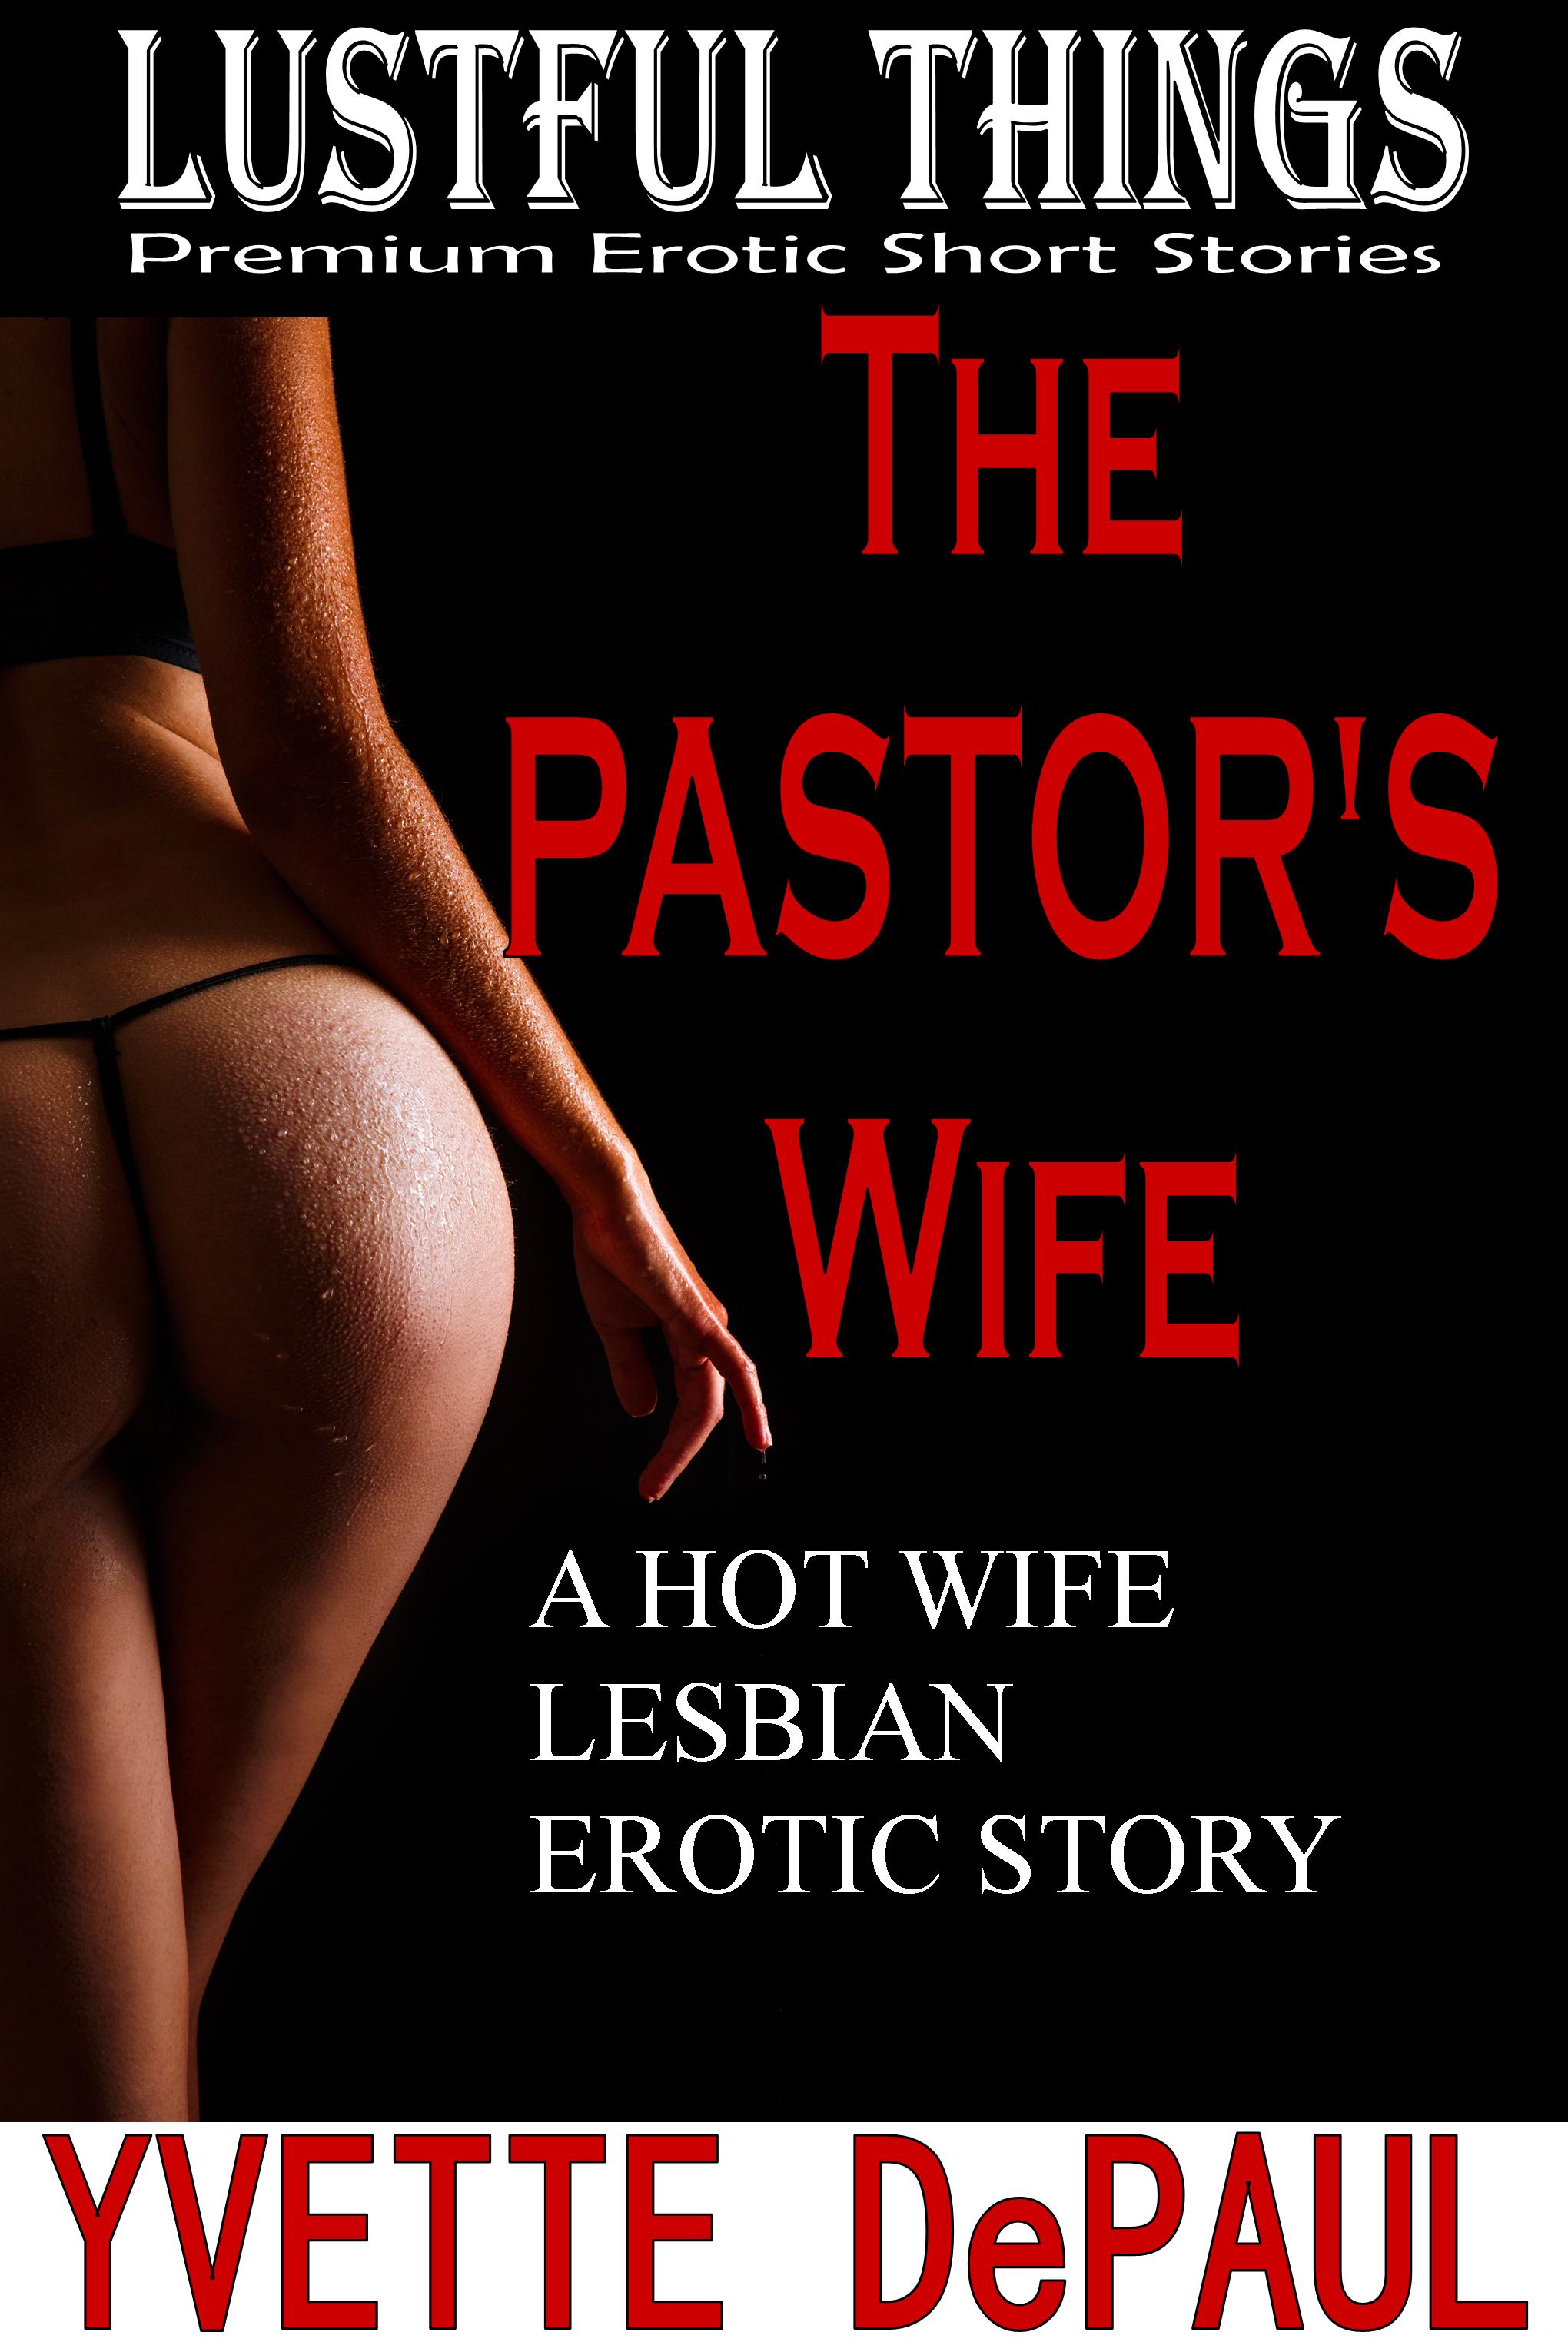 Erotic preacher story story wife